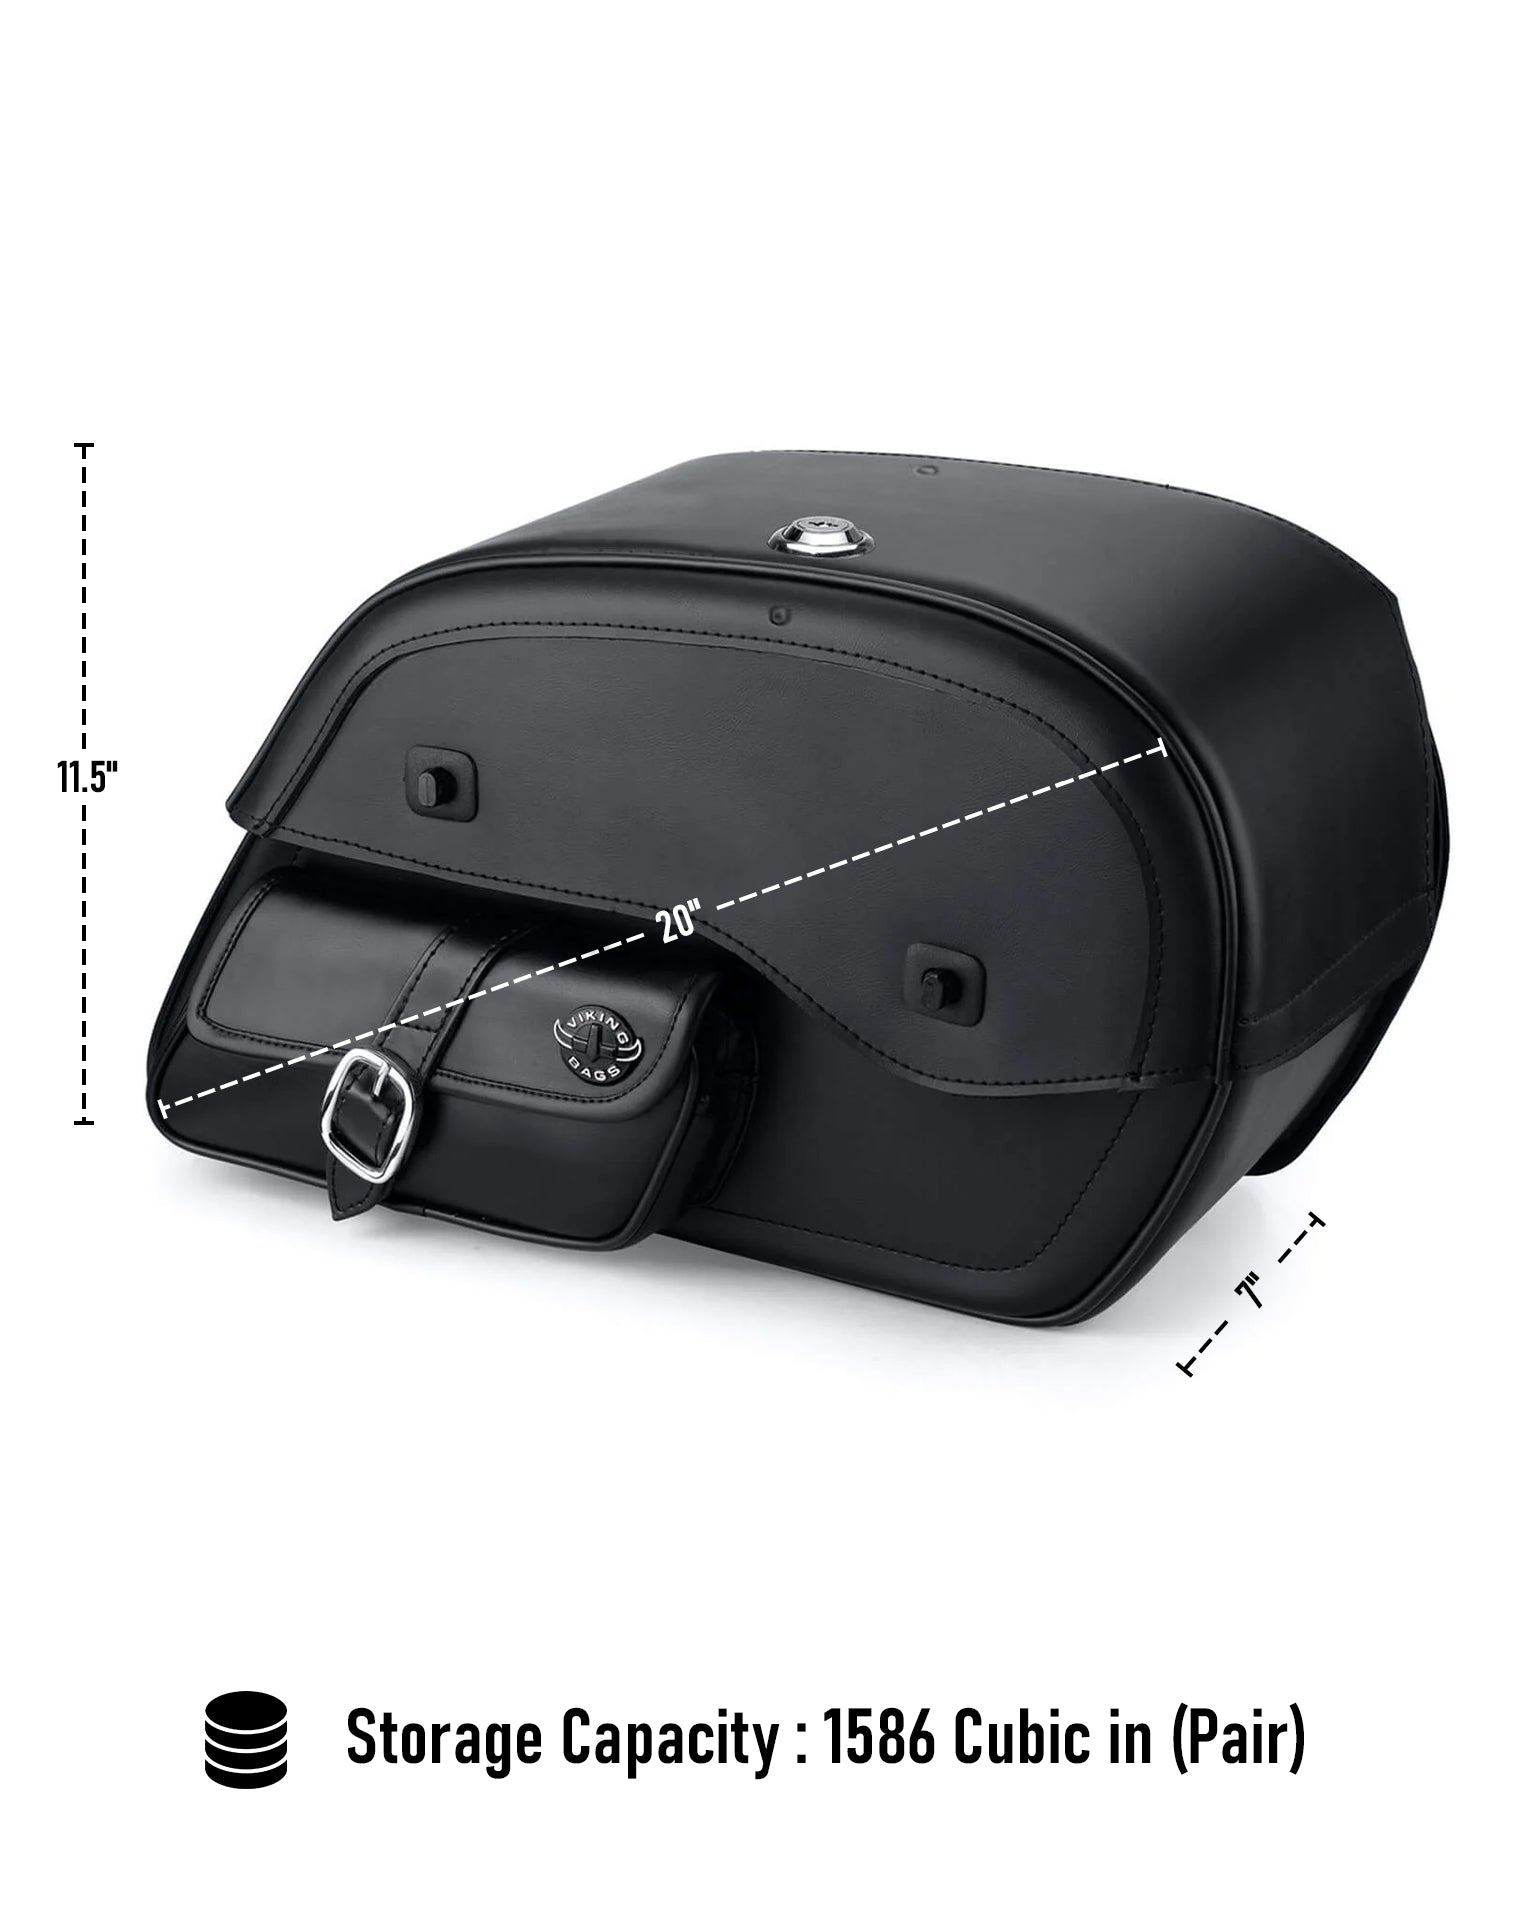 Viking Essential Side Pocket Large Shock Cutout Leather Motorcycle Saddlebags For Harley Sportster 883 Iron Xl883N Can Store Your Ridings Gears